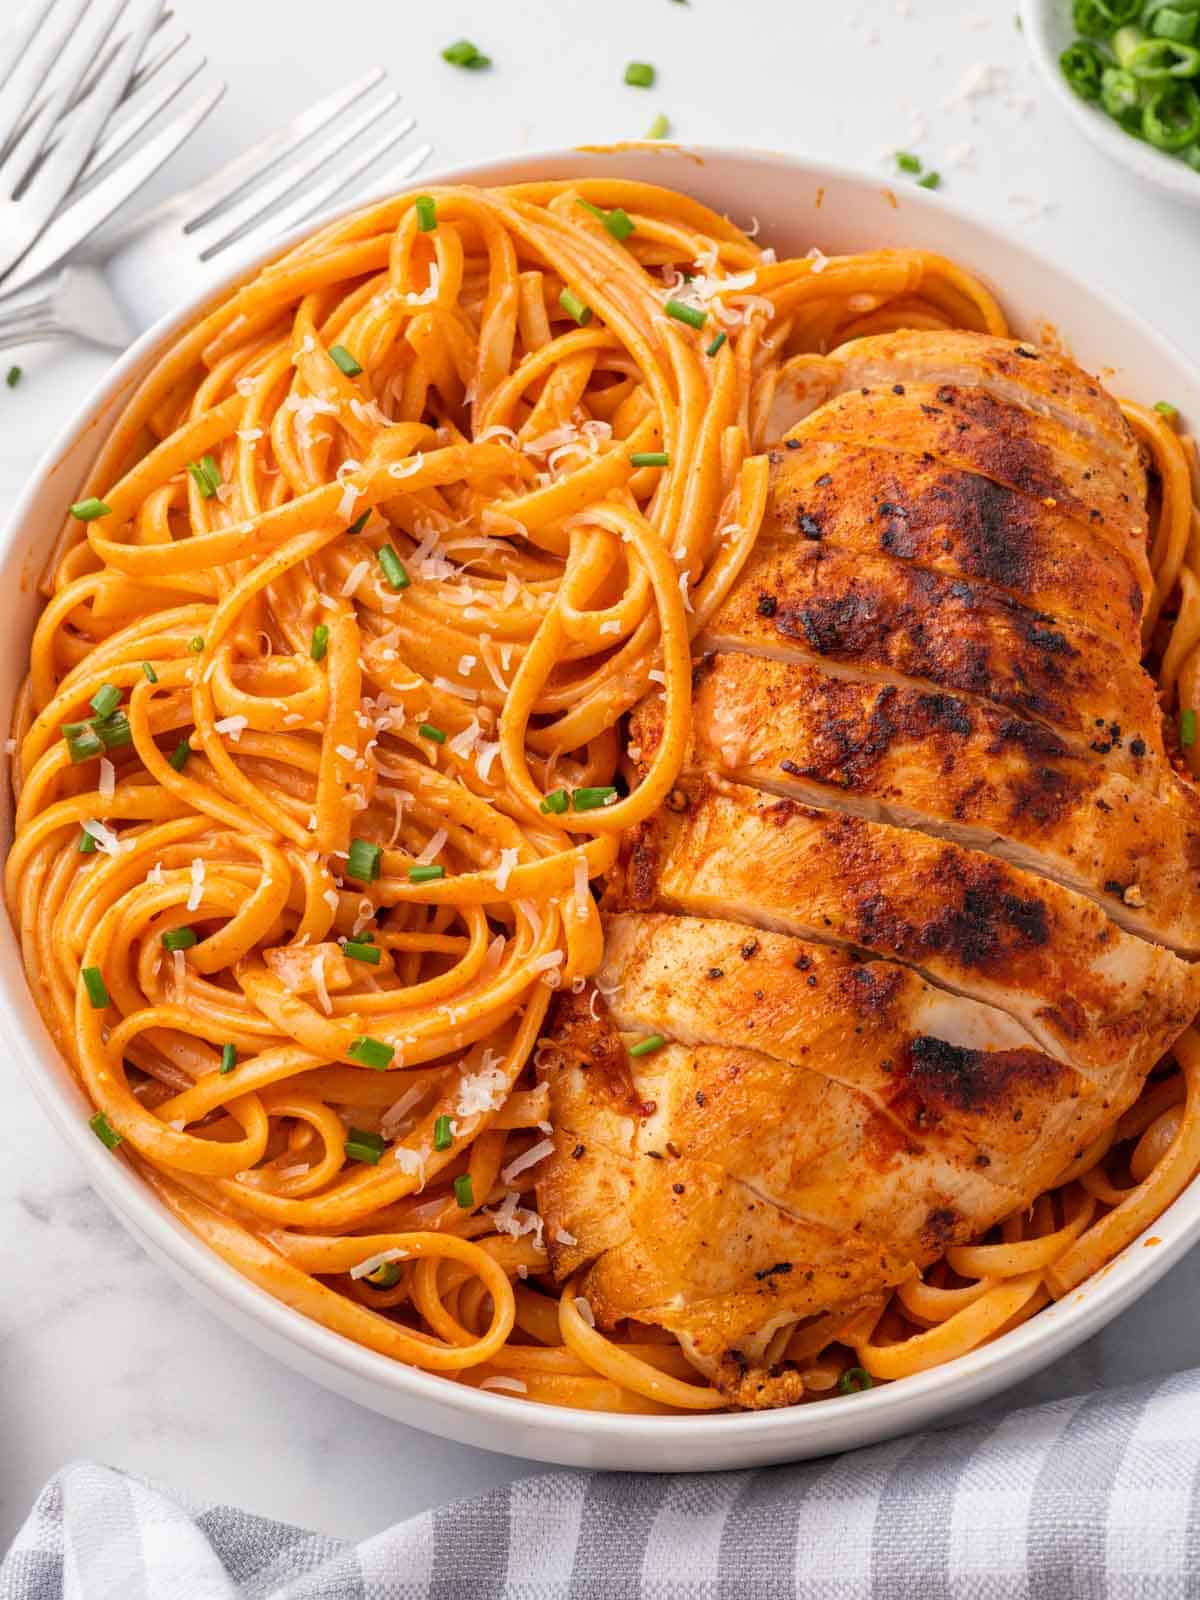 Spicy pasta on a plate with a side of chicken.